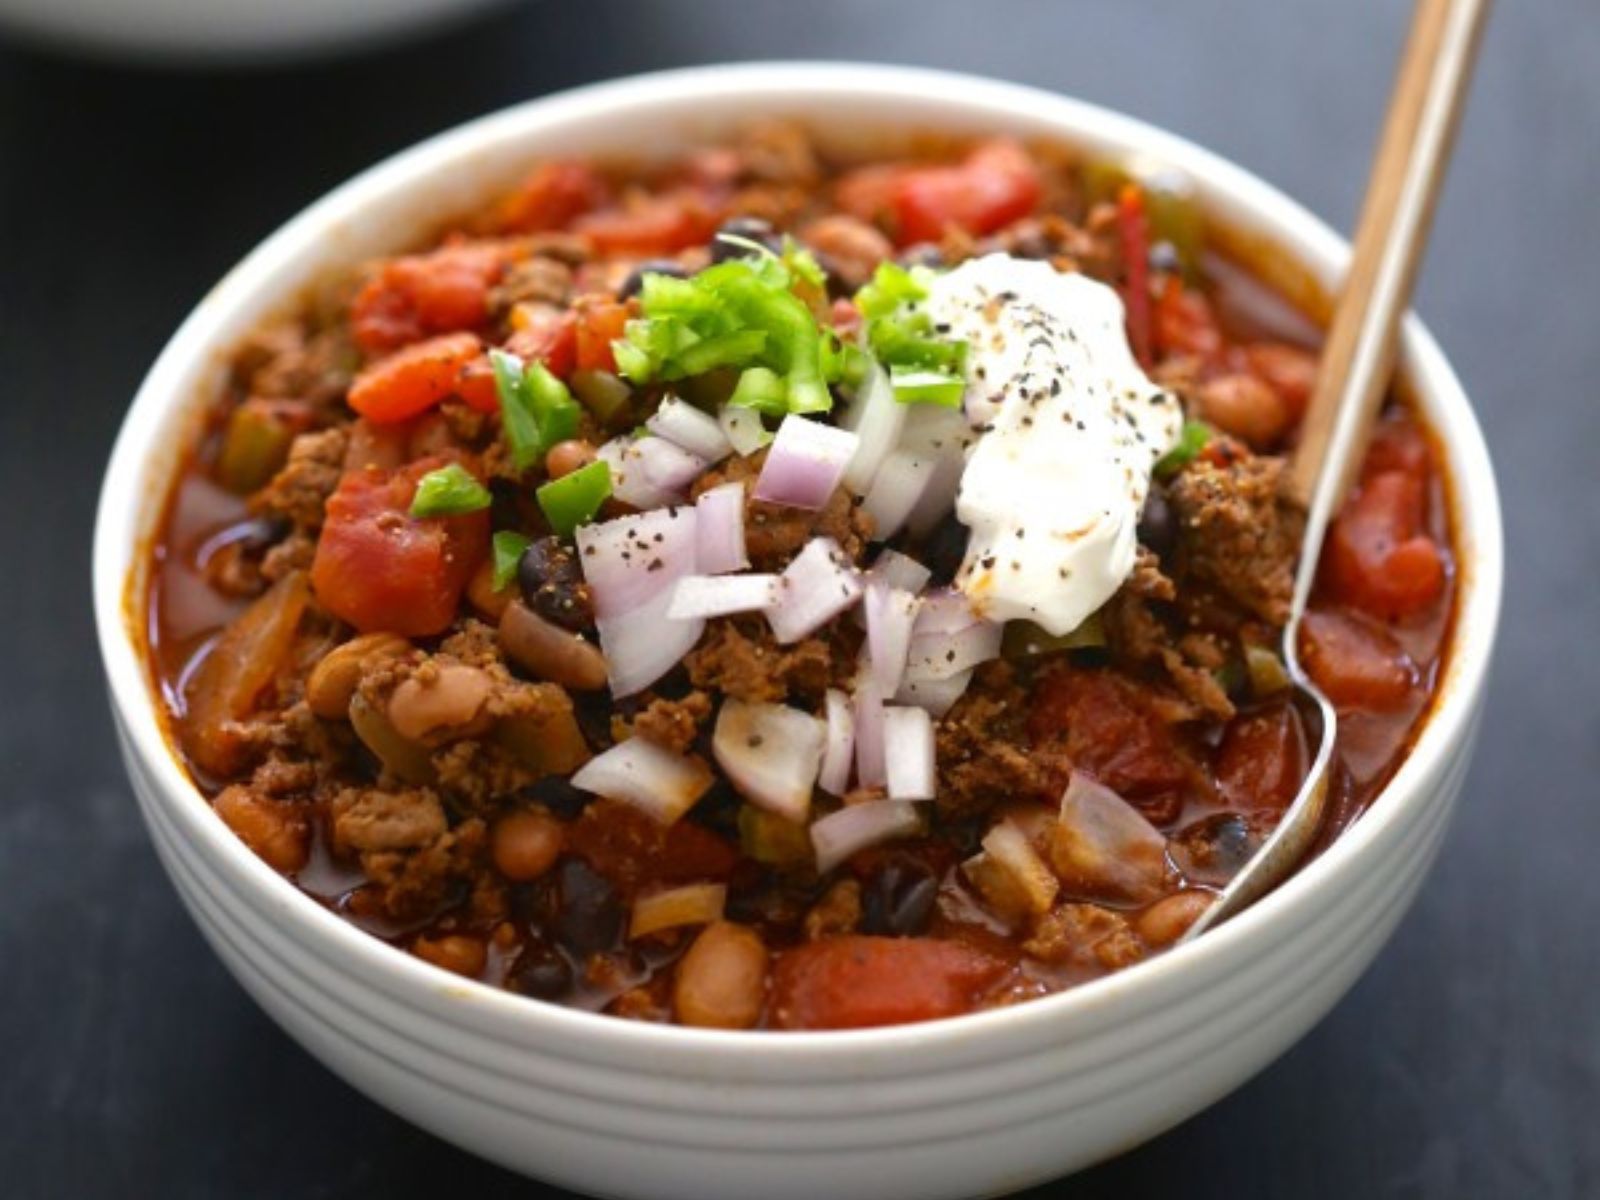 6 Turkey Chili Recipes to Mix Up Your One-Pot Meals